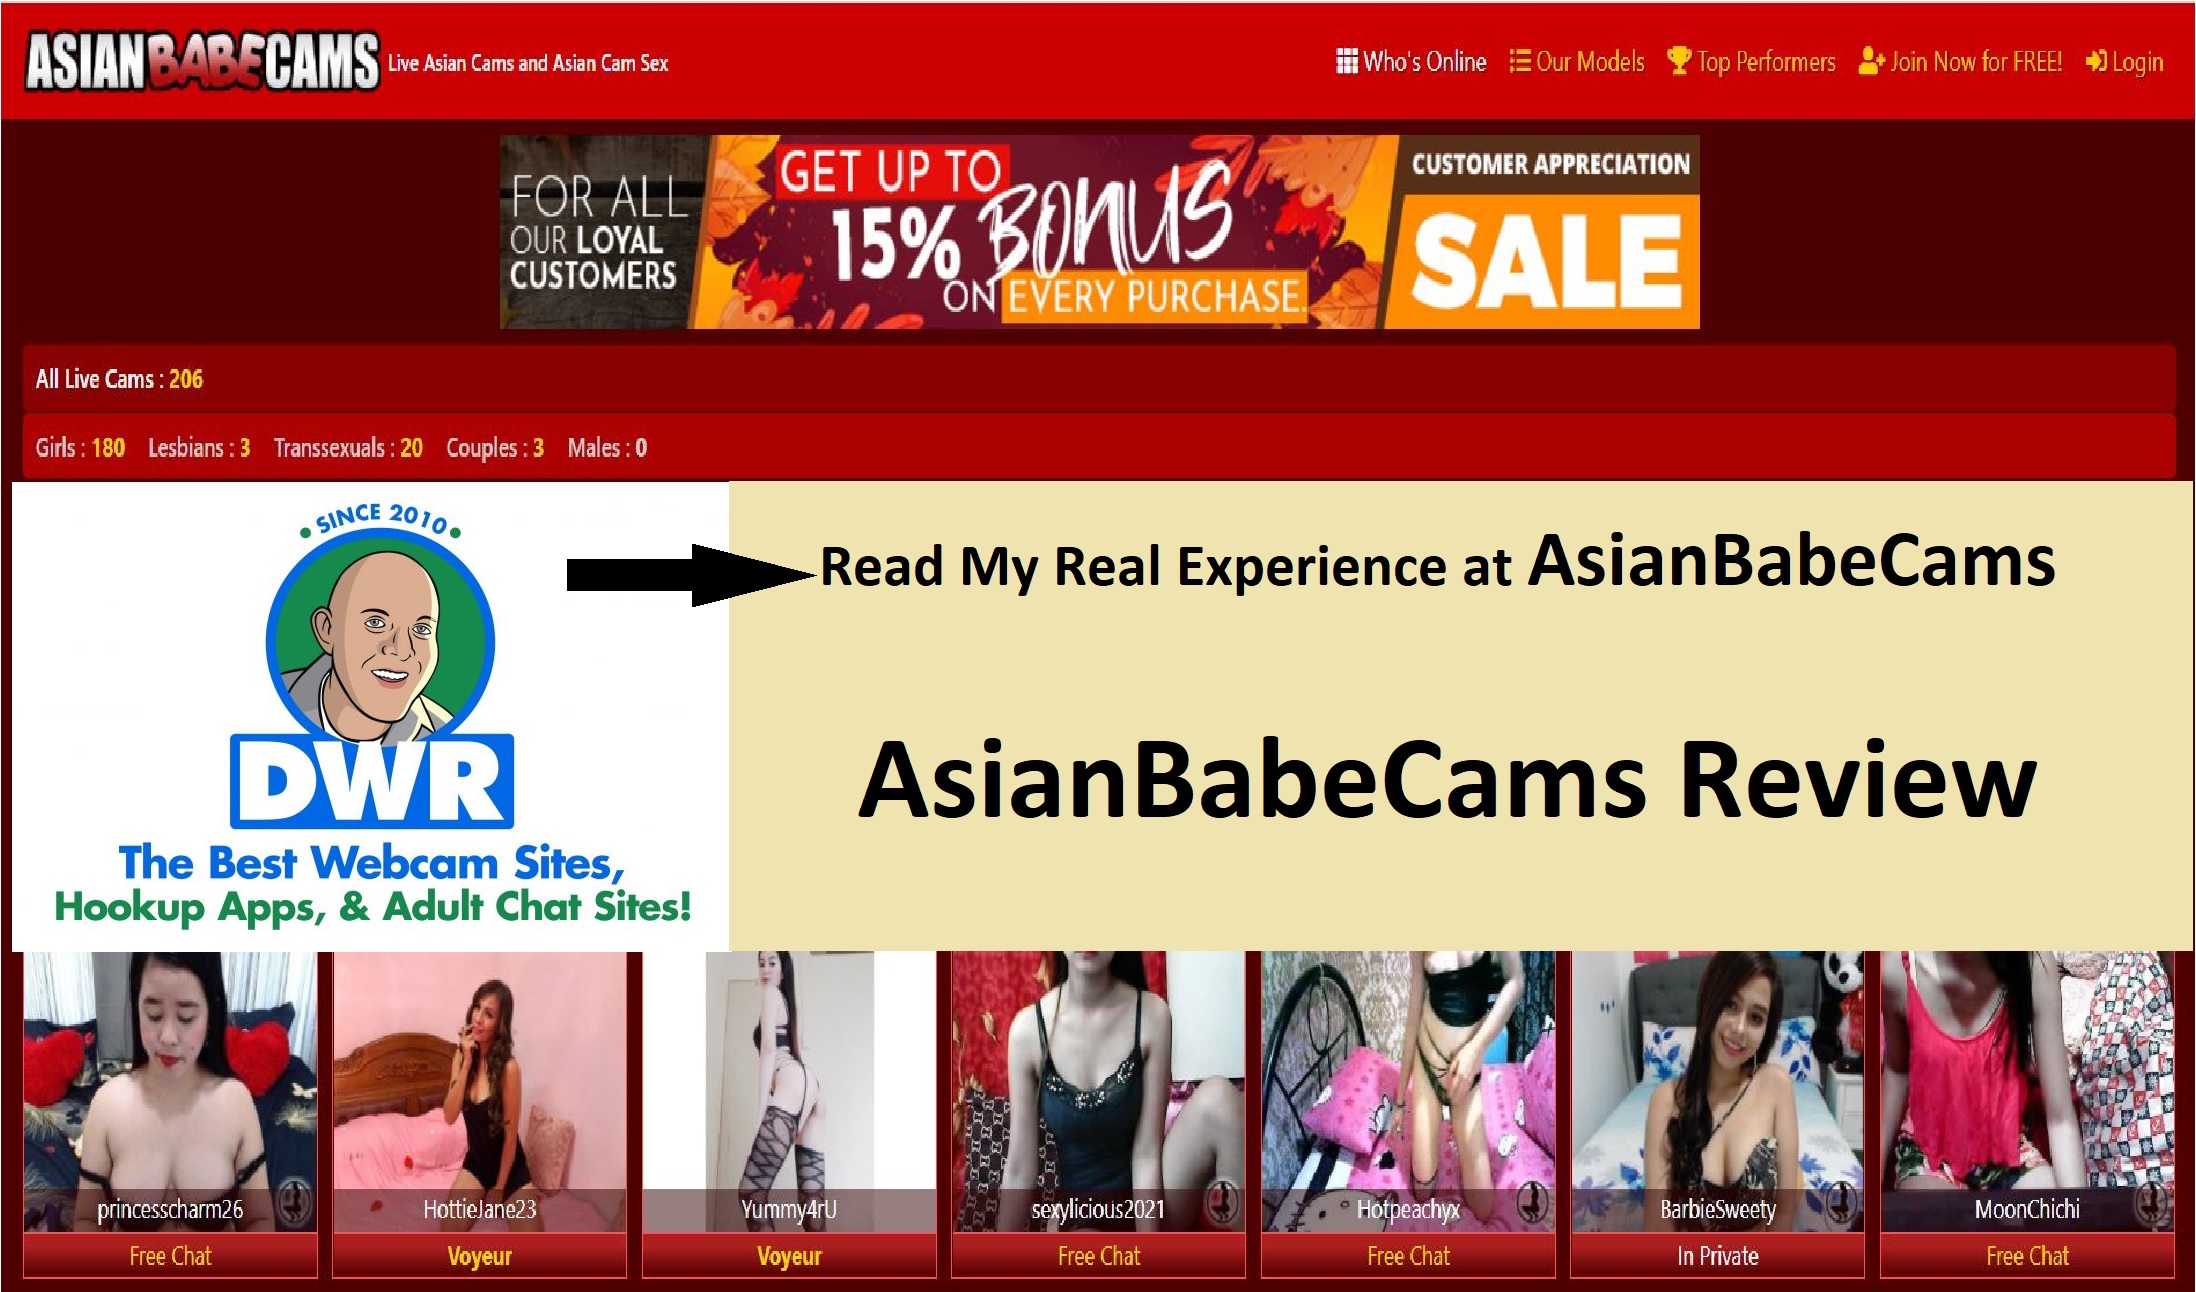 cody j waters recommends Asian Babe Cams